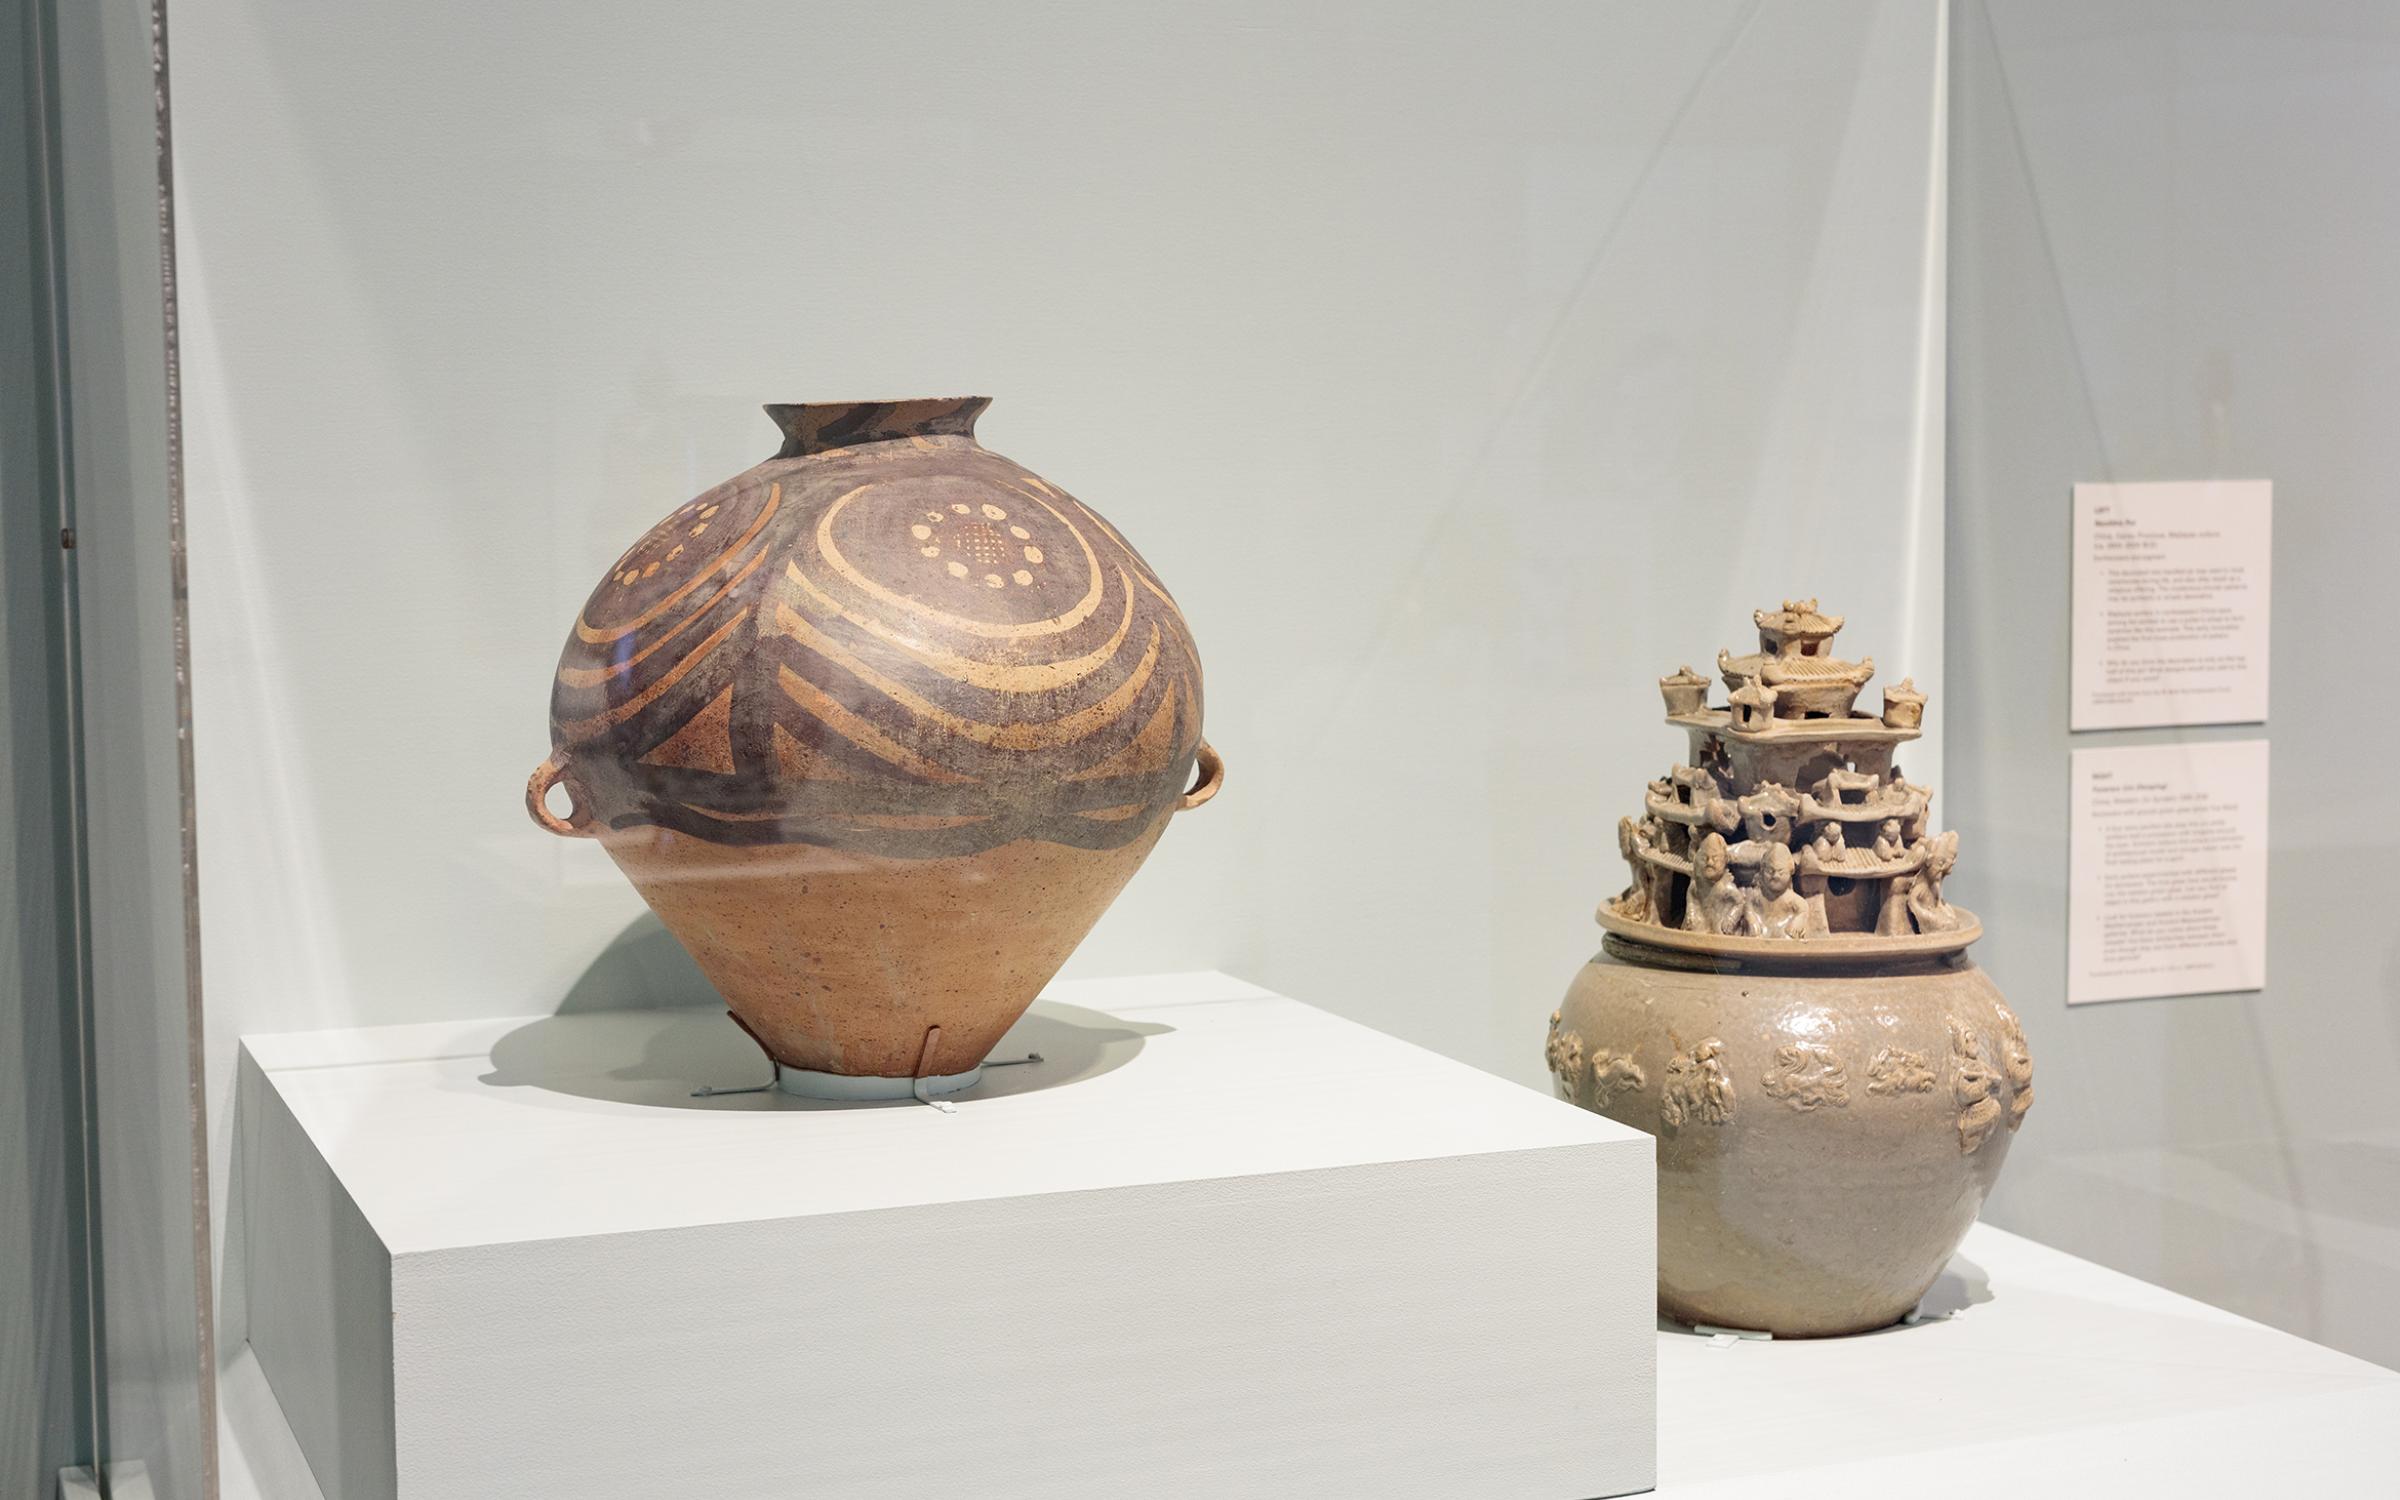 Two large pieces of carved and painted pottery sit inside a glass display case on a mint-colored stand.